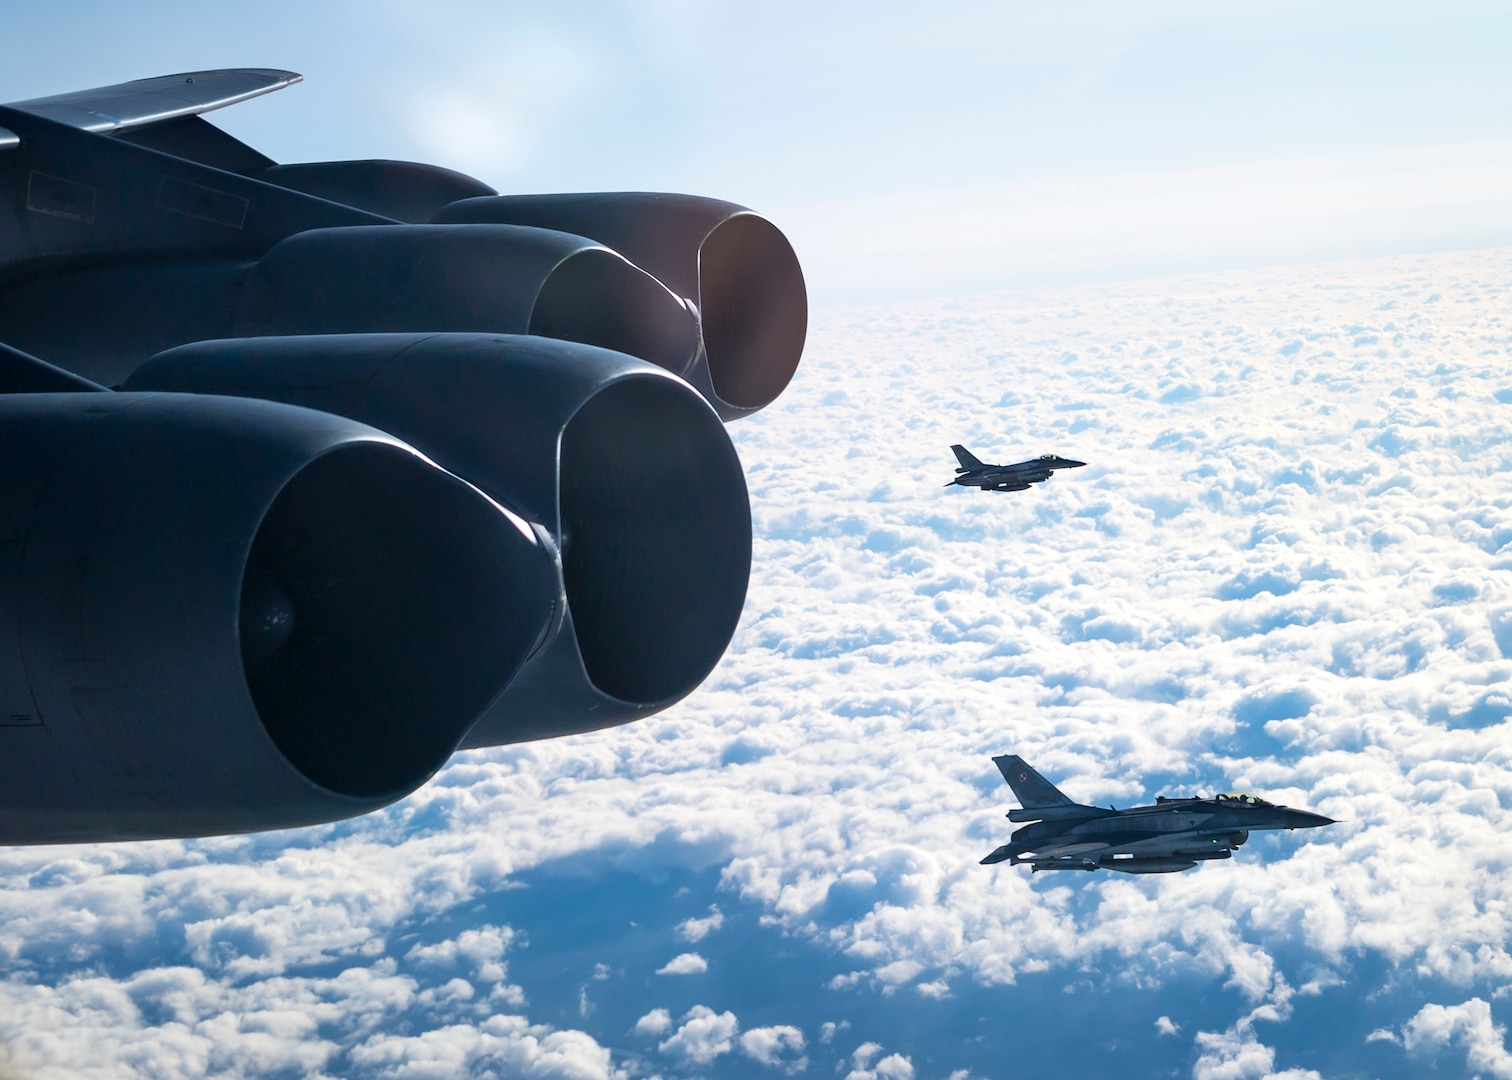 Two Polish Air Force F-16C Fighting Falcons engage in a planned intercept of a U.S. Air Force B-52H Stratofortress over Poland during Global Thunder 20, as part of a Bomber Task Force mission, Oct. 28, 2019. Global Thunder is an exercise that focuses on U.S. Strategic Command and component forces' ability to support the geographic combatant commands, deter adversaries and improve interoperability with joint partners and allied nations. (U.S. Air Force photo by Airman 1st Class Duncan C. Bevan)